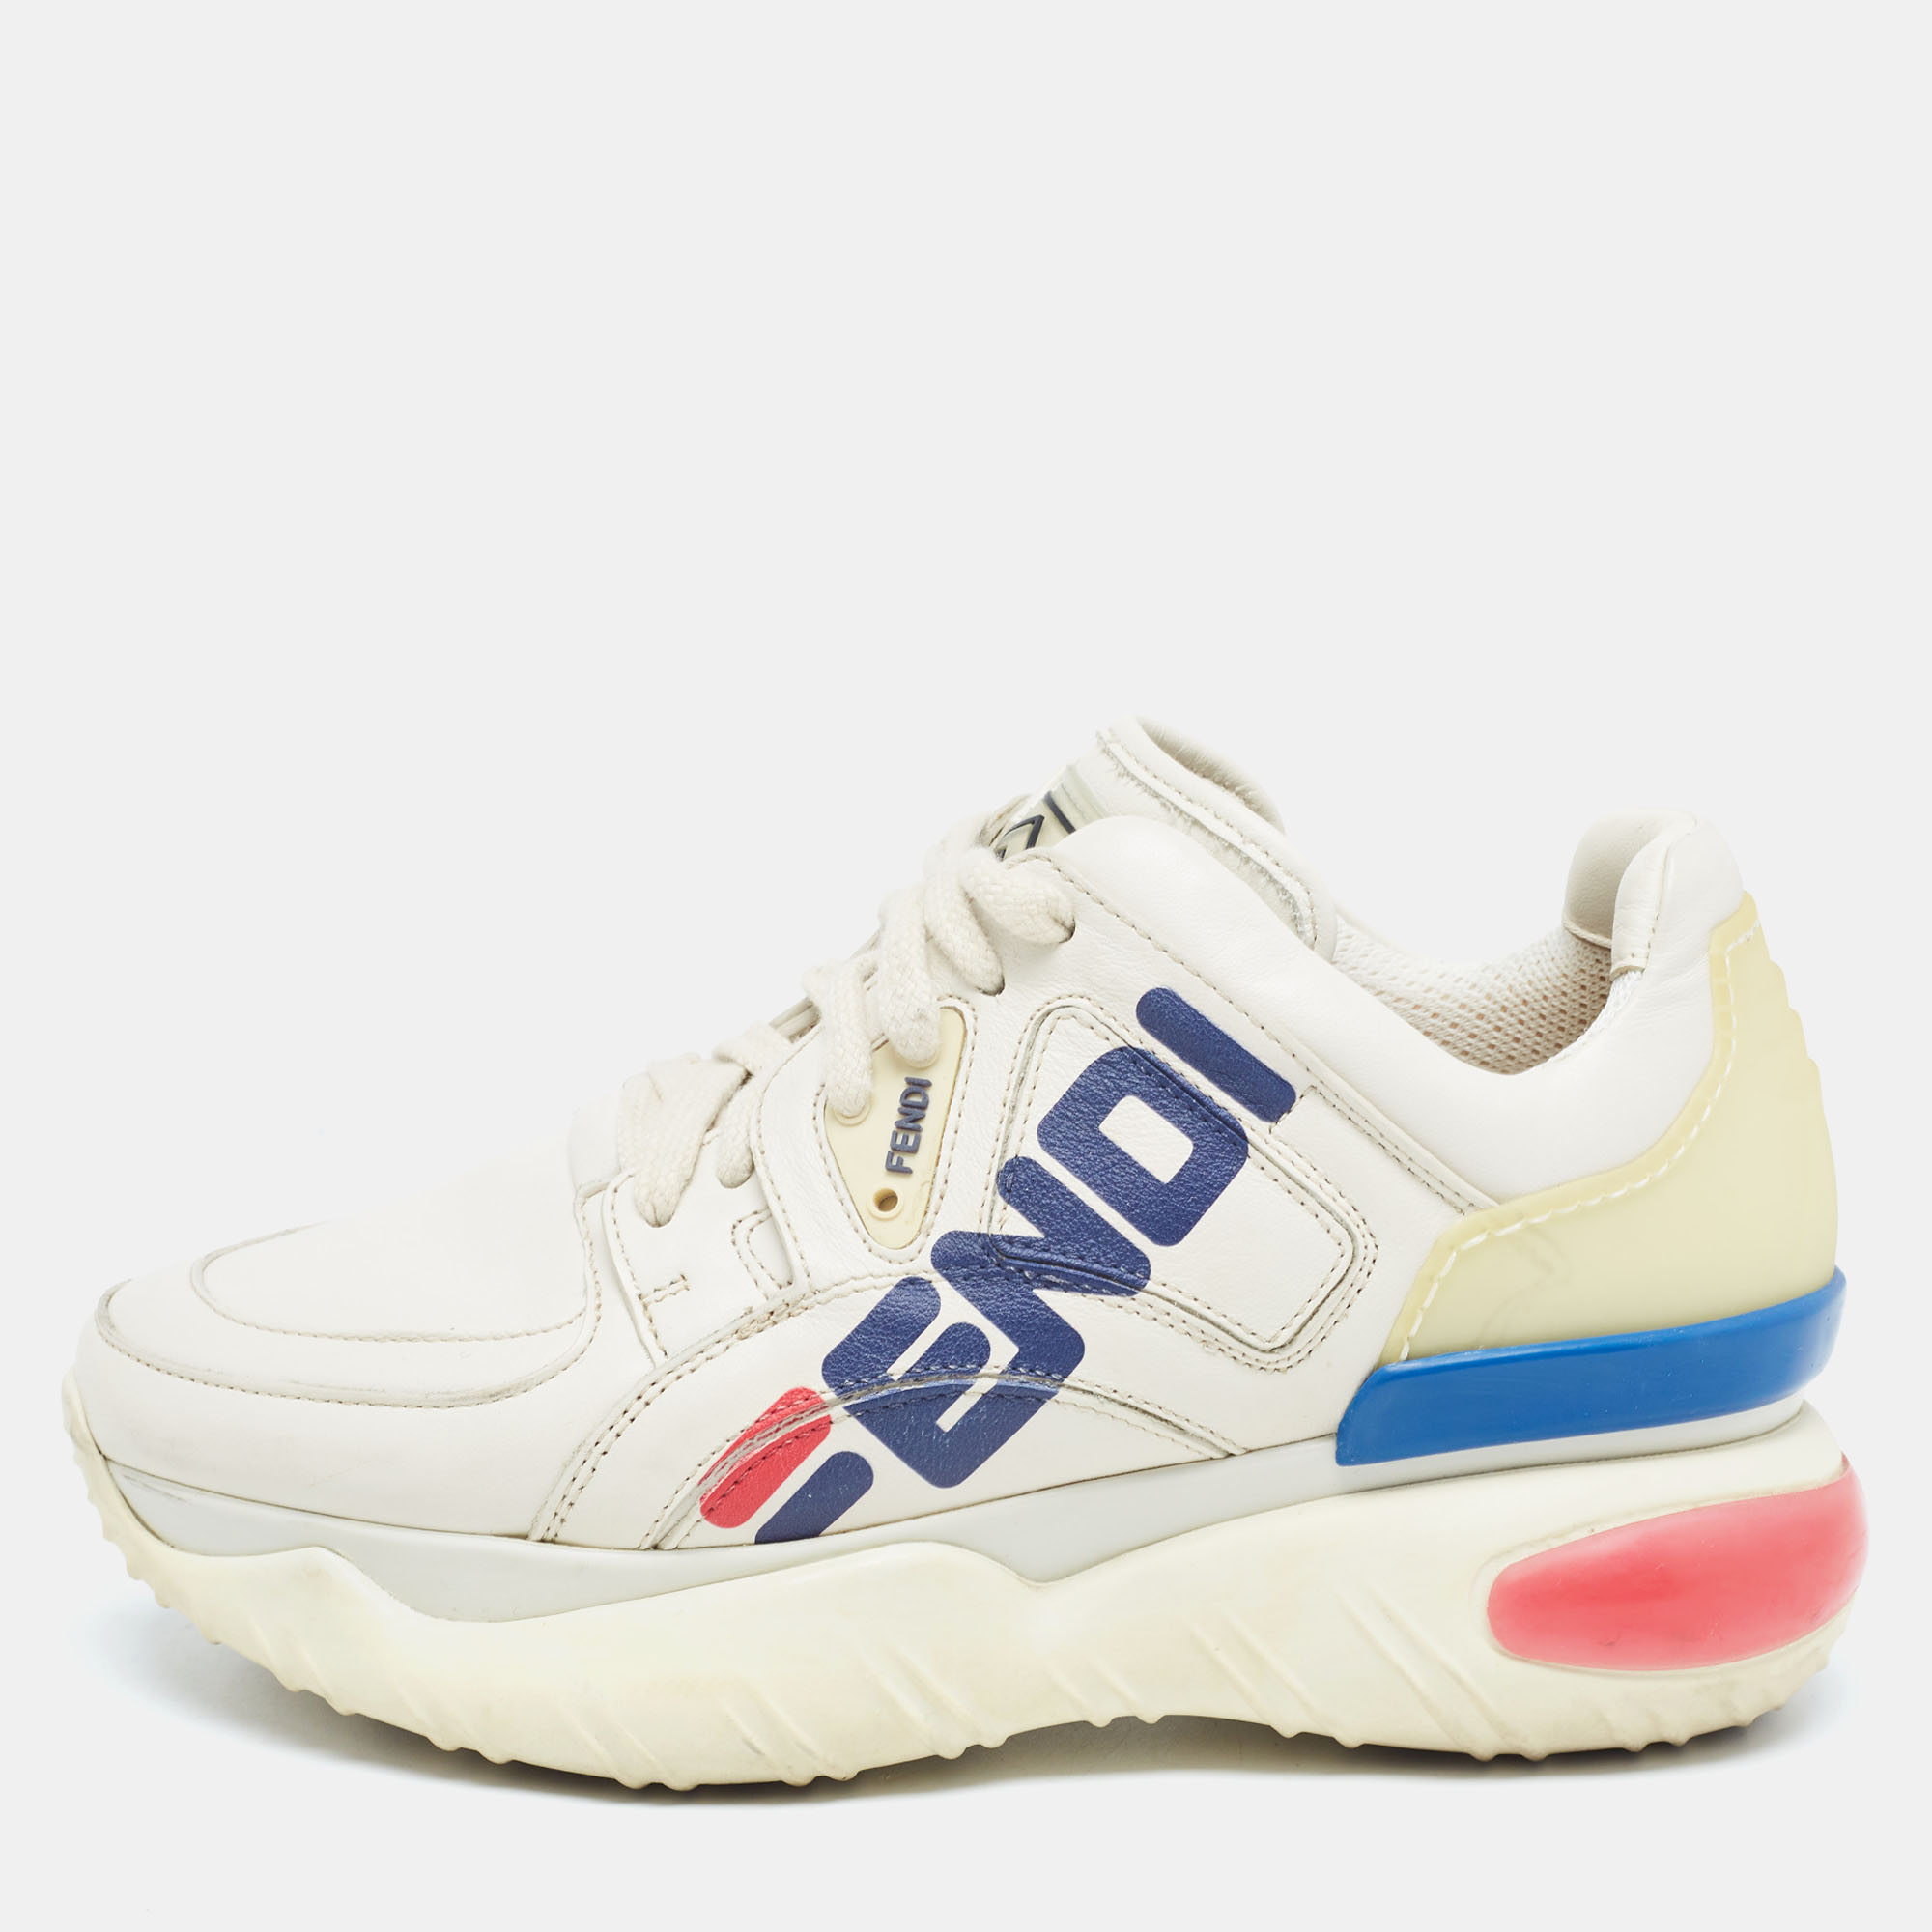 Coming in a classic silhouette these Fendi sneakers are a seamless combination of luxury comfort and style. These sneakers are designed with signature details and comfortable insoles.